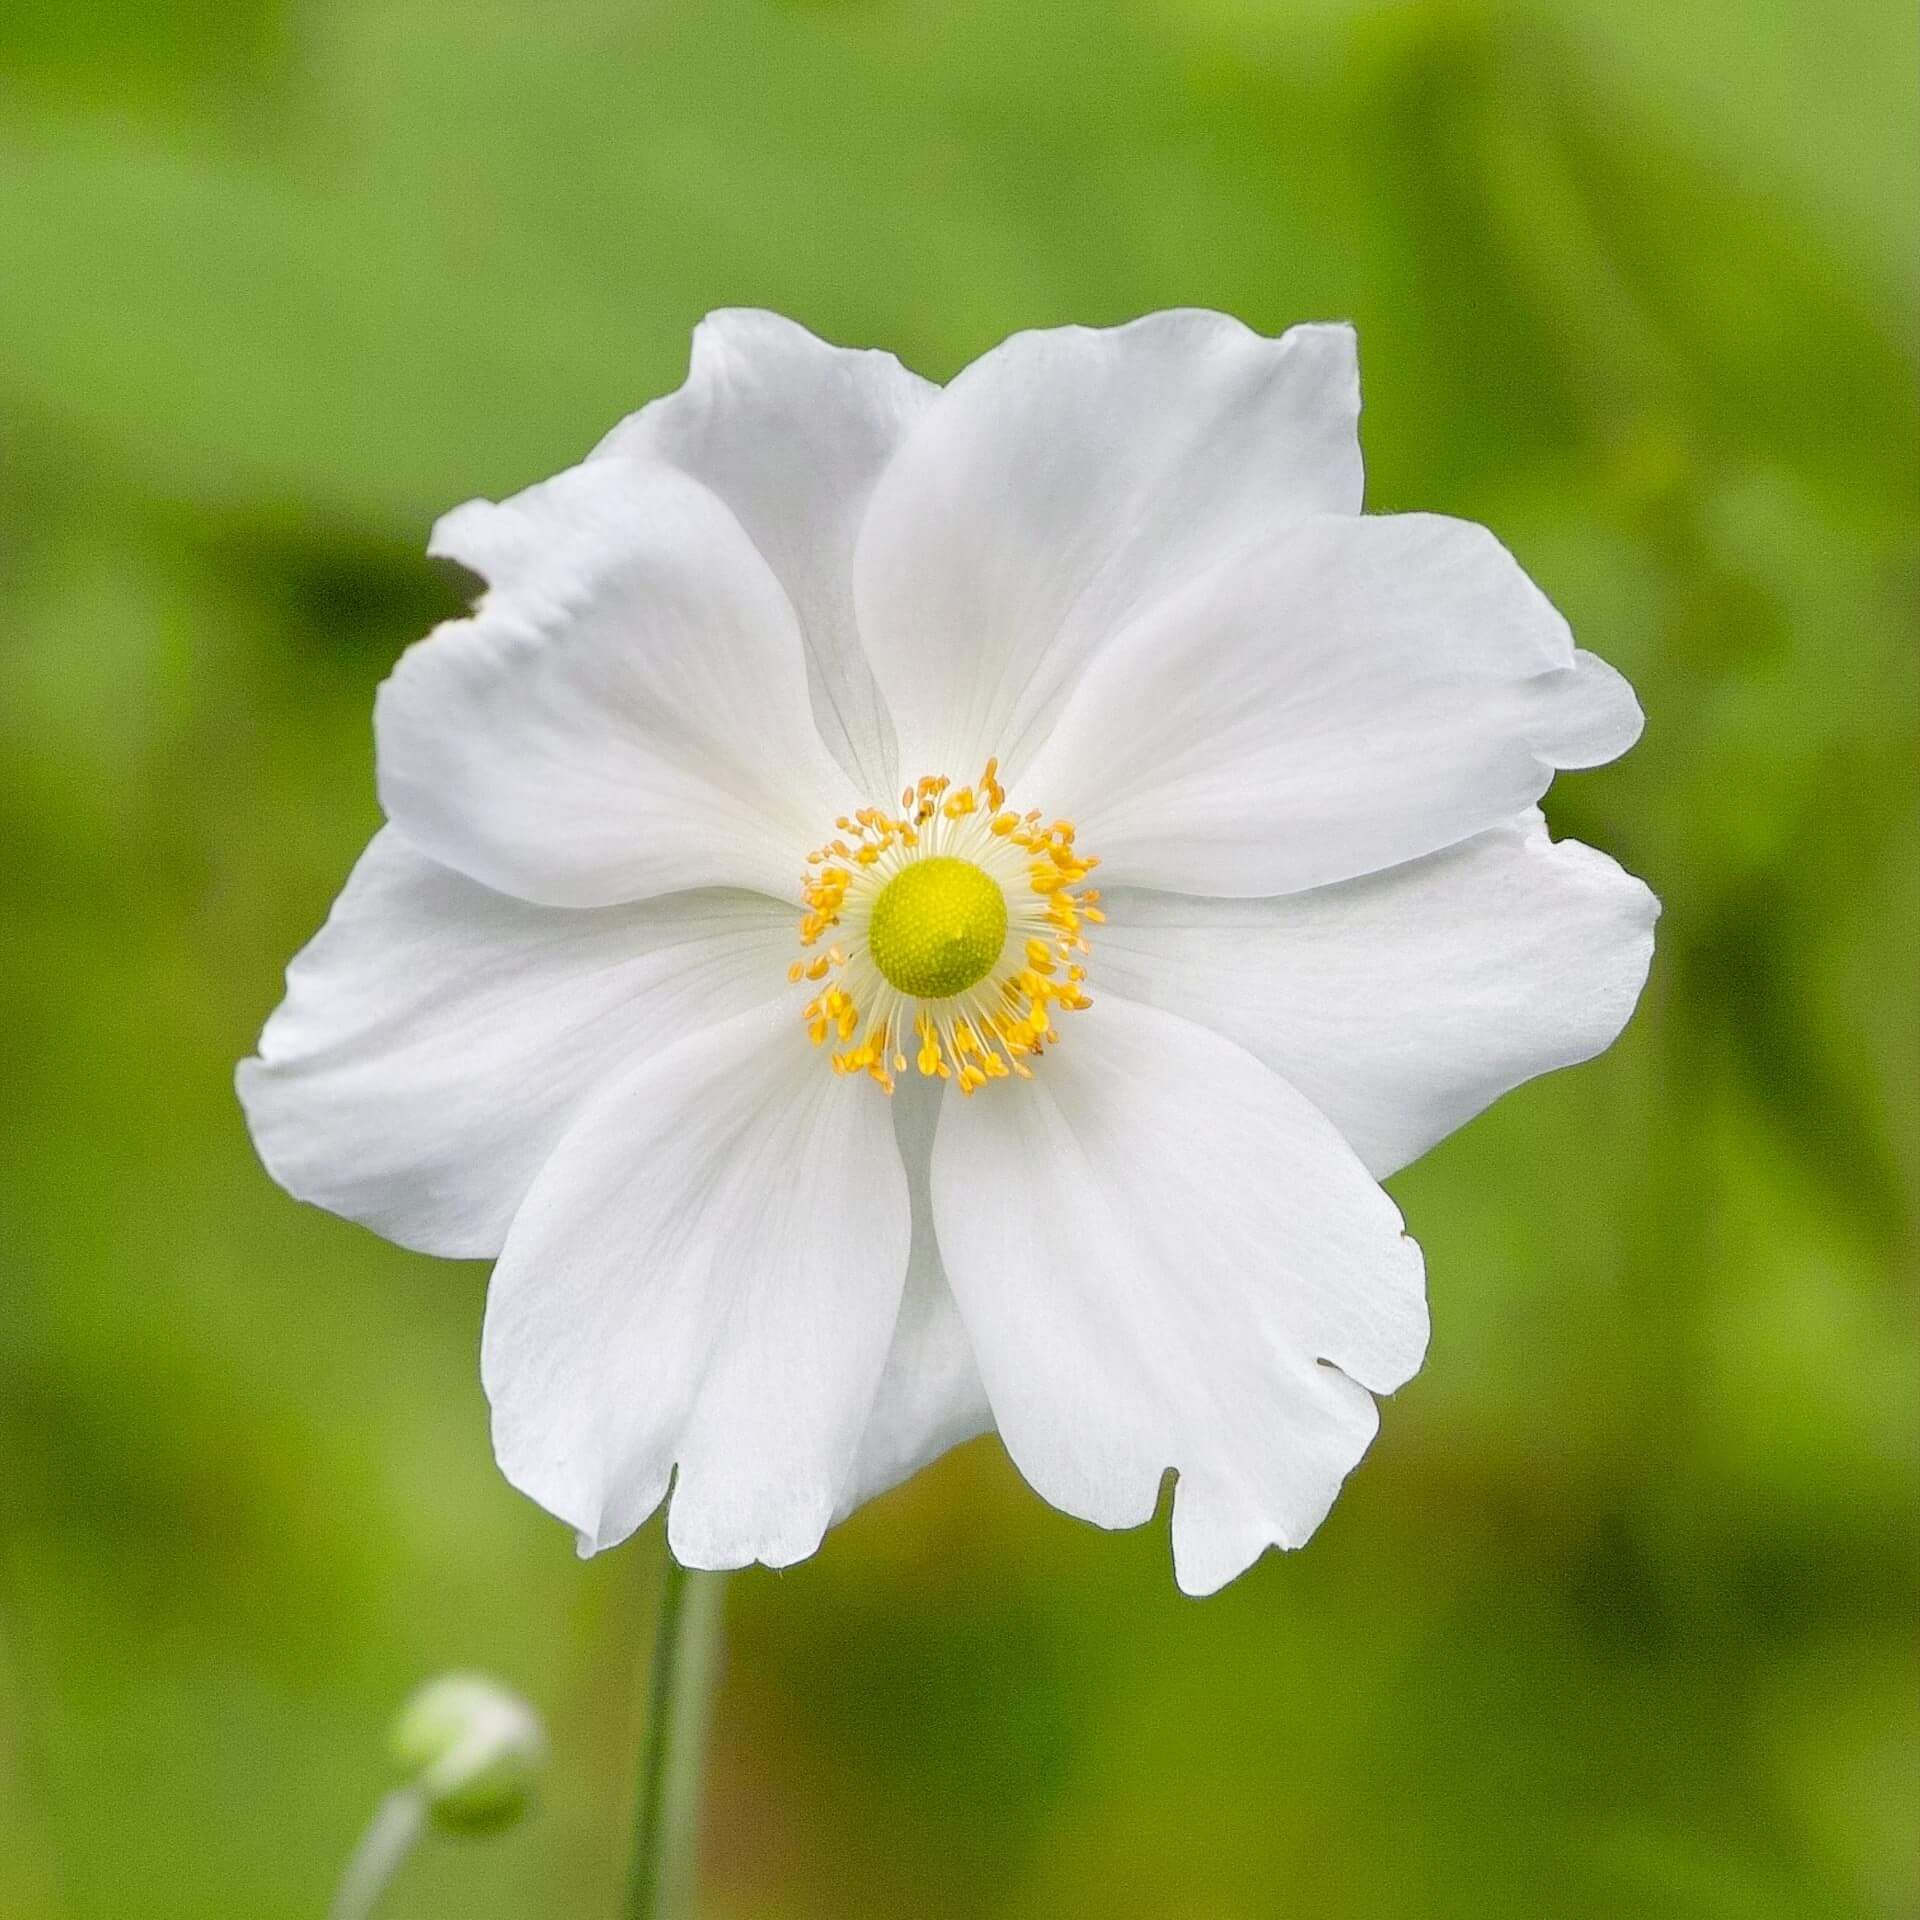 Herbst-Anemone 'Andrea Atkinson' (Anemone japonica 'Andrea Atkinson')